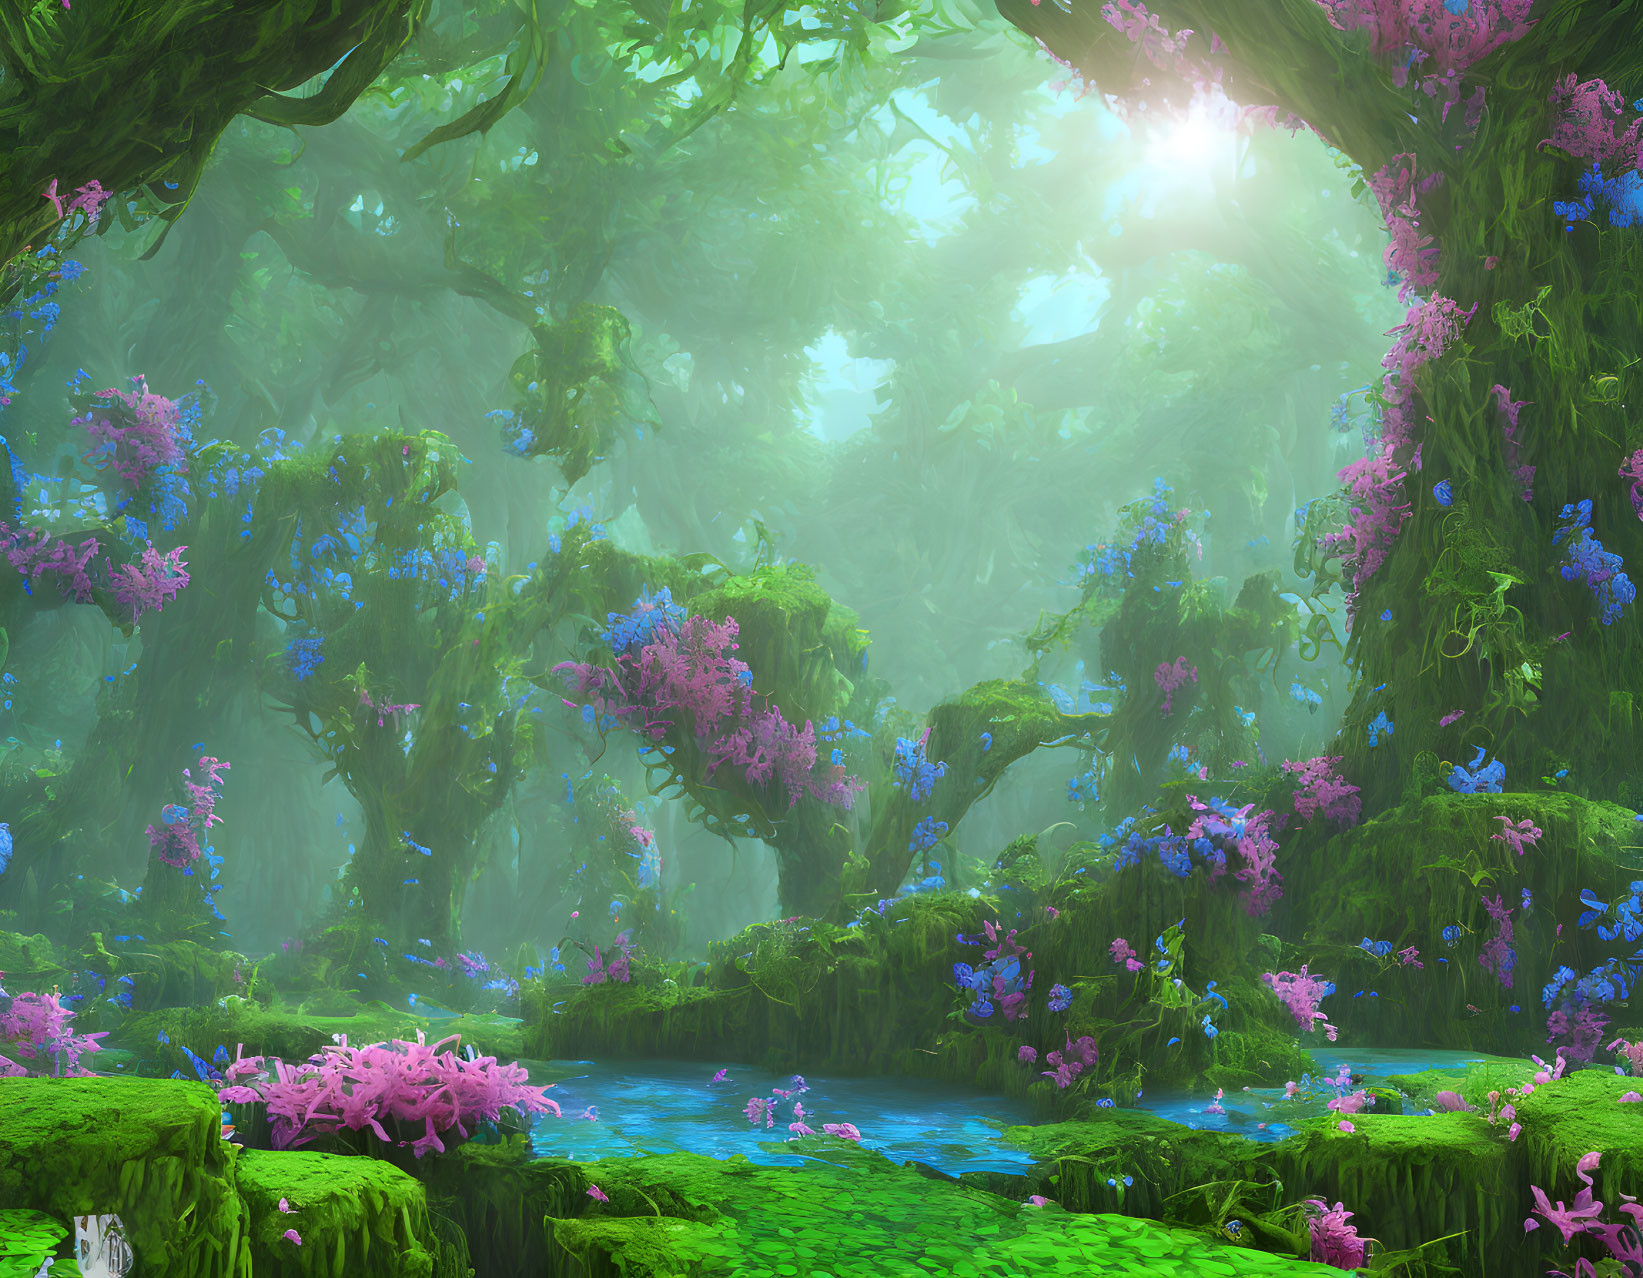 Mystical forest with green foliage, purple flowers, and blue stream in soft sunlight